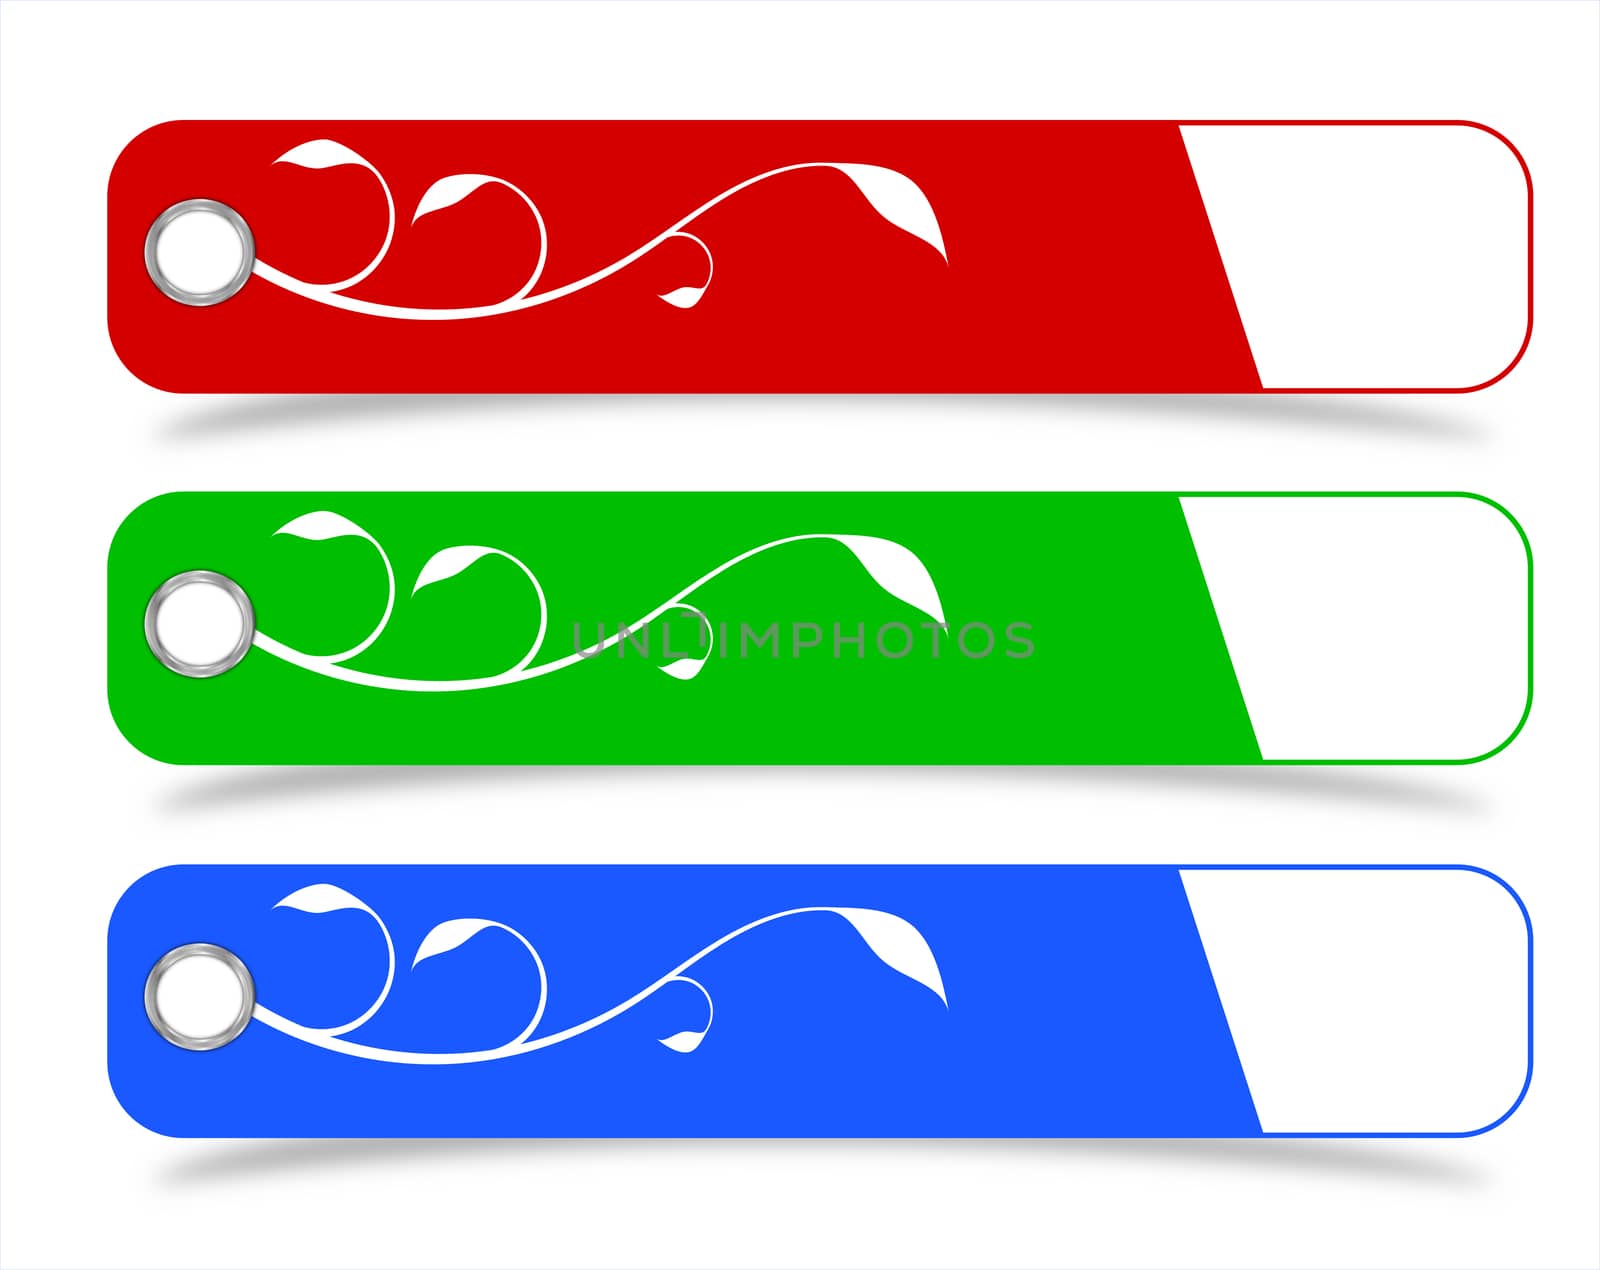 Horizontal product tags with floral theme in three colors - red, blue, green
